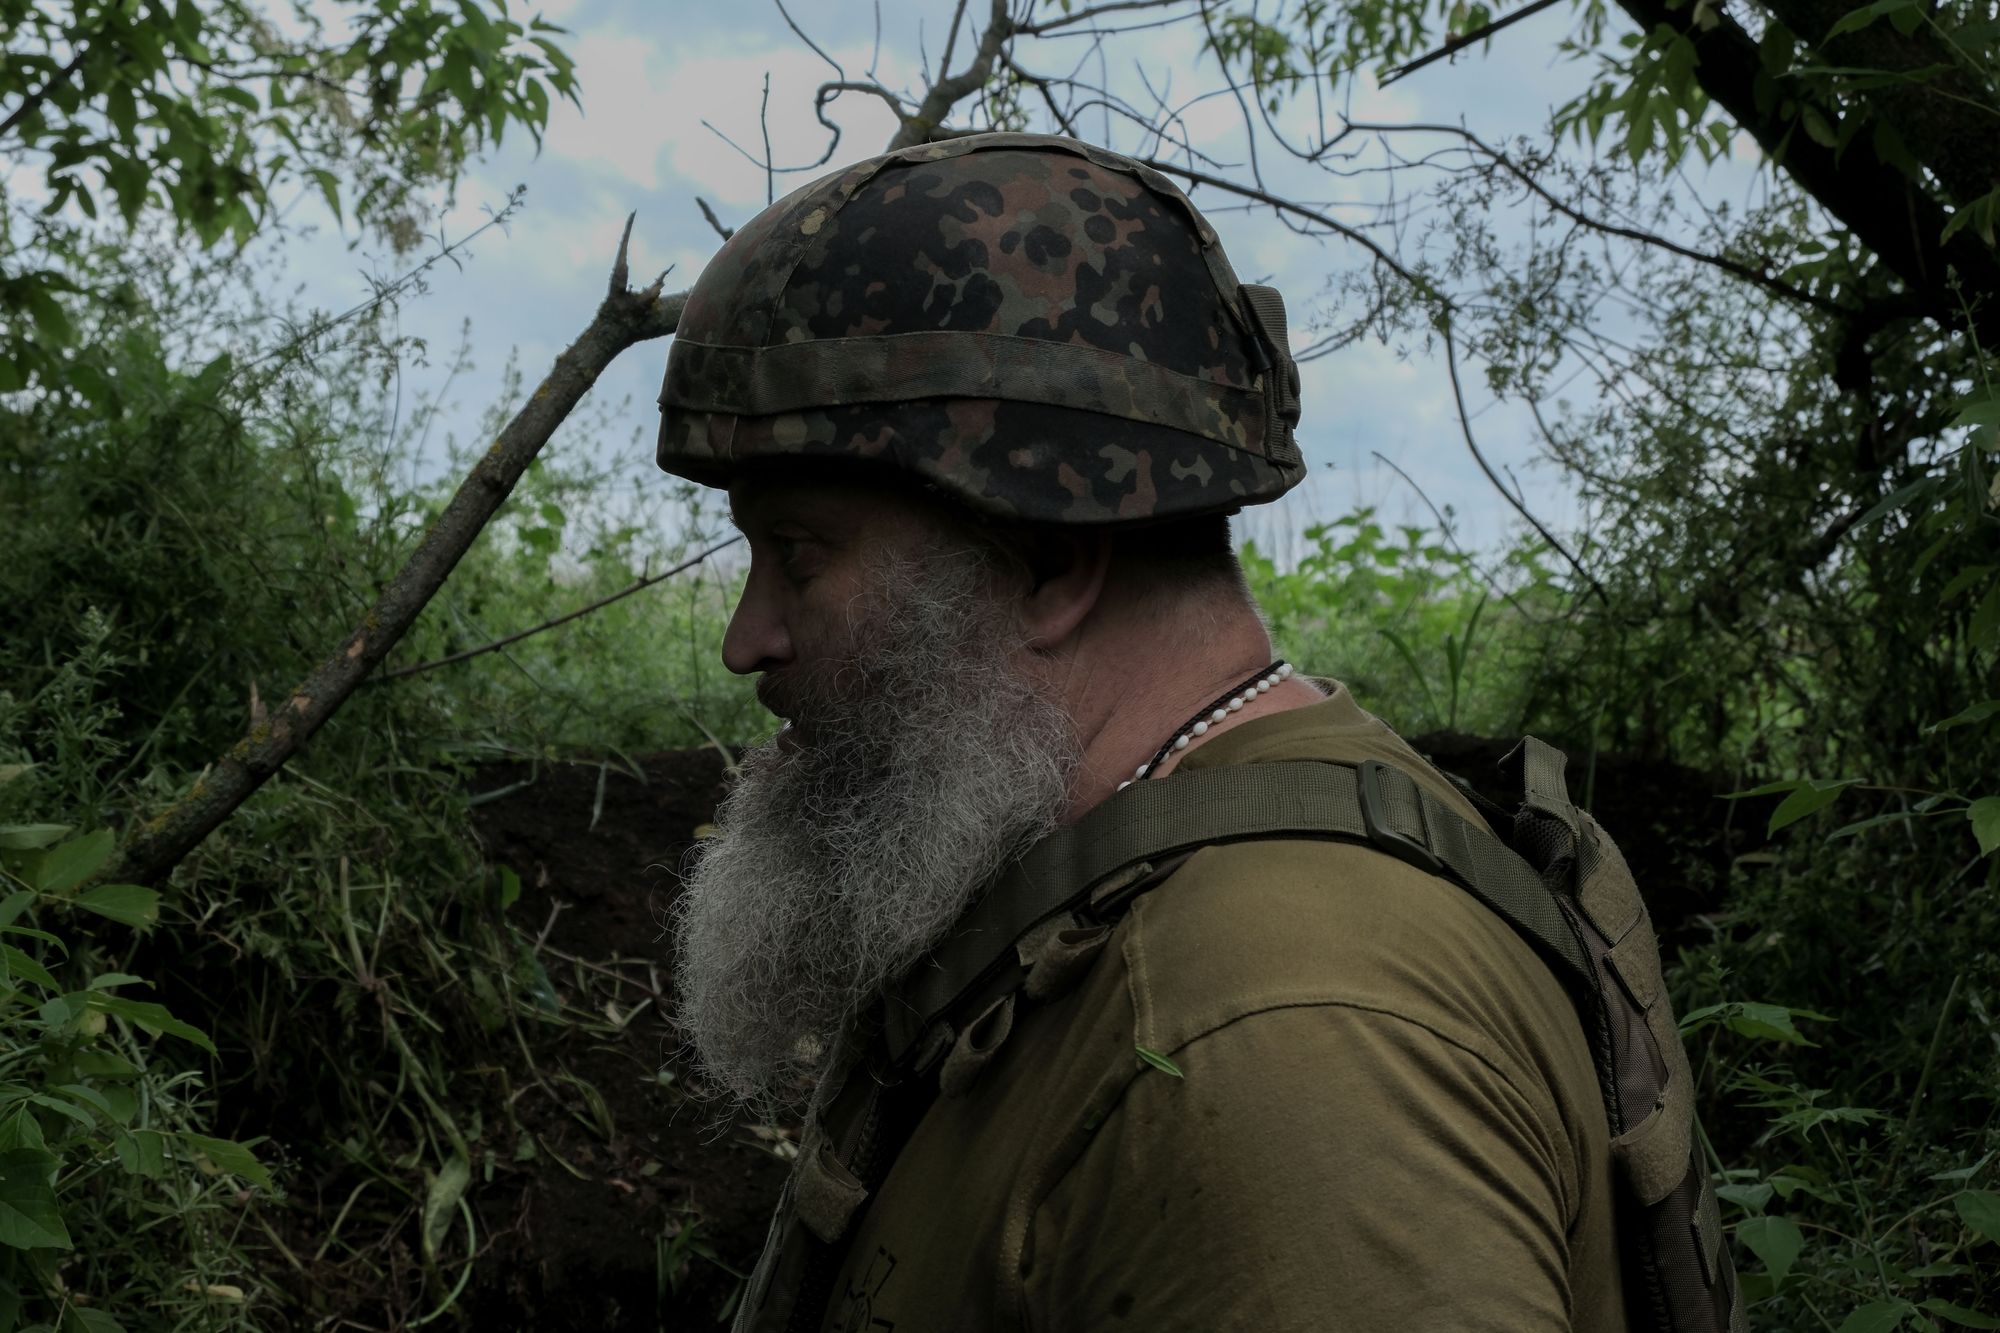 On Ukraine’s southern front line, tension in the air before decisive counteroffensive